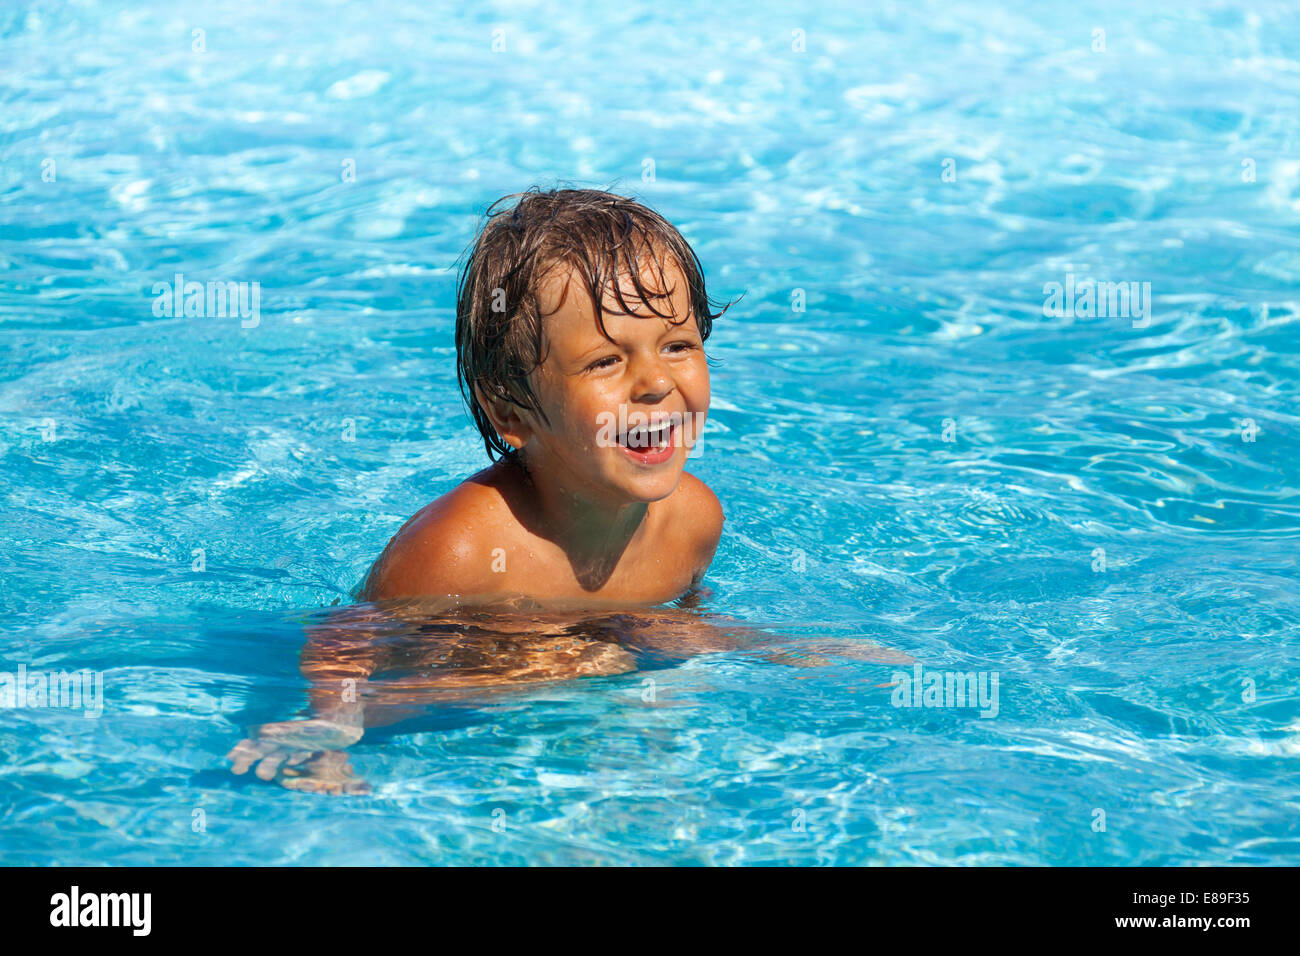 Laughing boy with positive emotions swim in pool Stock Photo